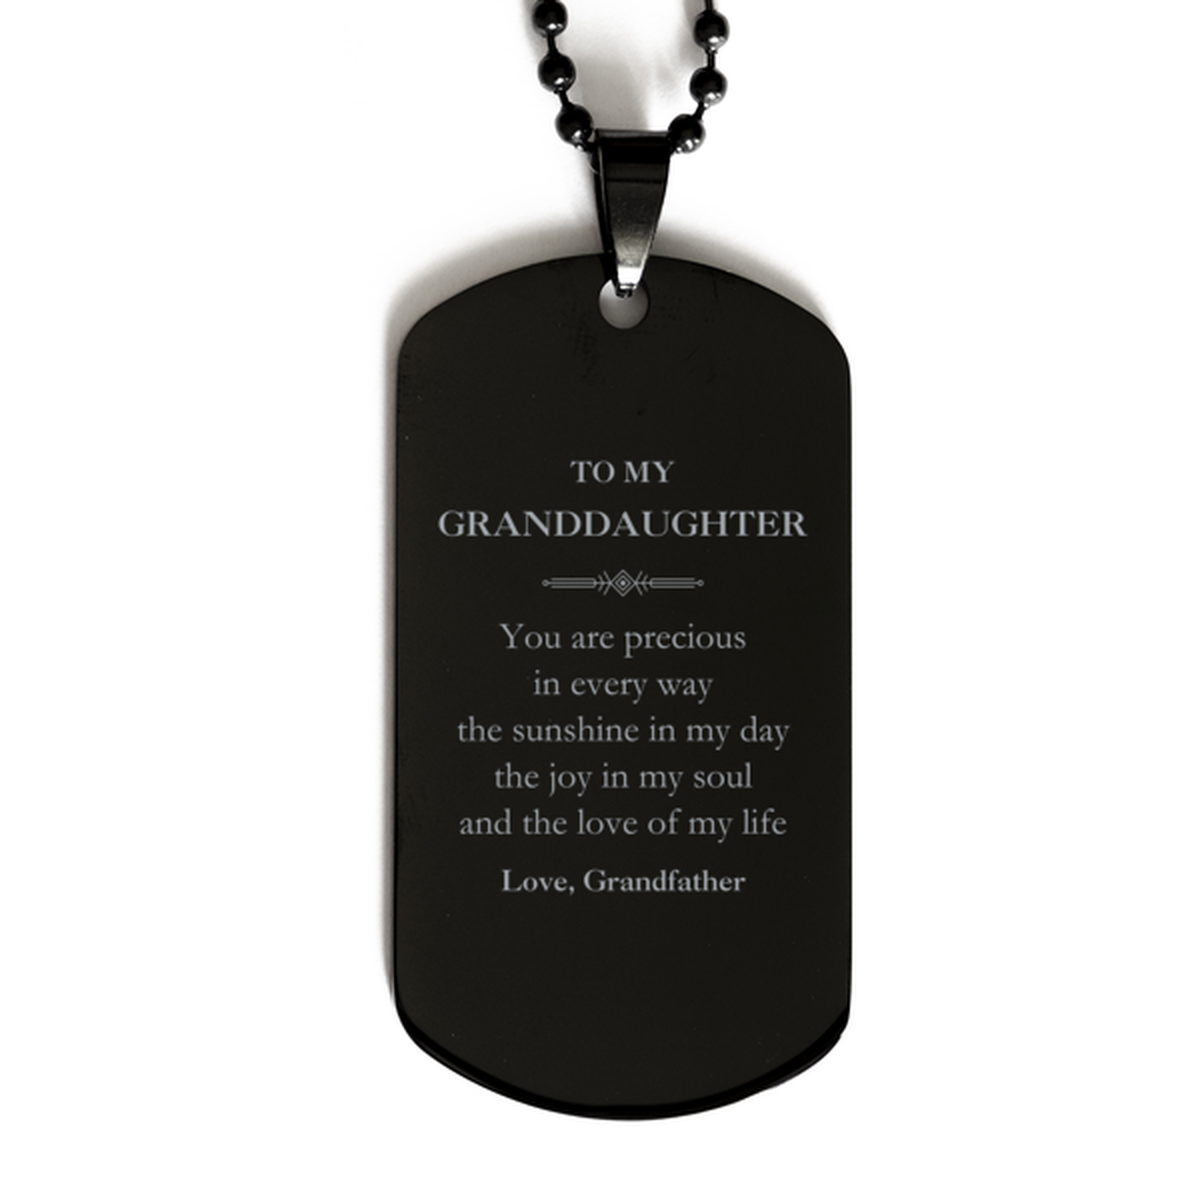 Graduation Gifts for Granddaughter Black Dog Tag Present from Grandfather, Christmas Granddaughter Birthday Gifts Granddaughter You are precious in every way the sunshine in my day. Love, Grandfather